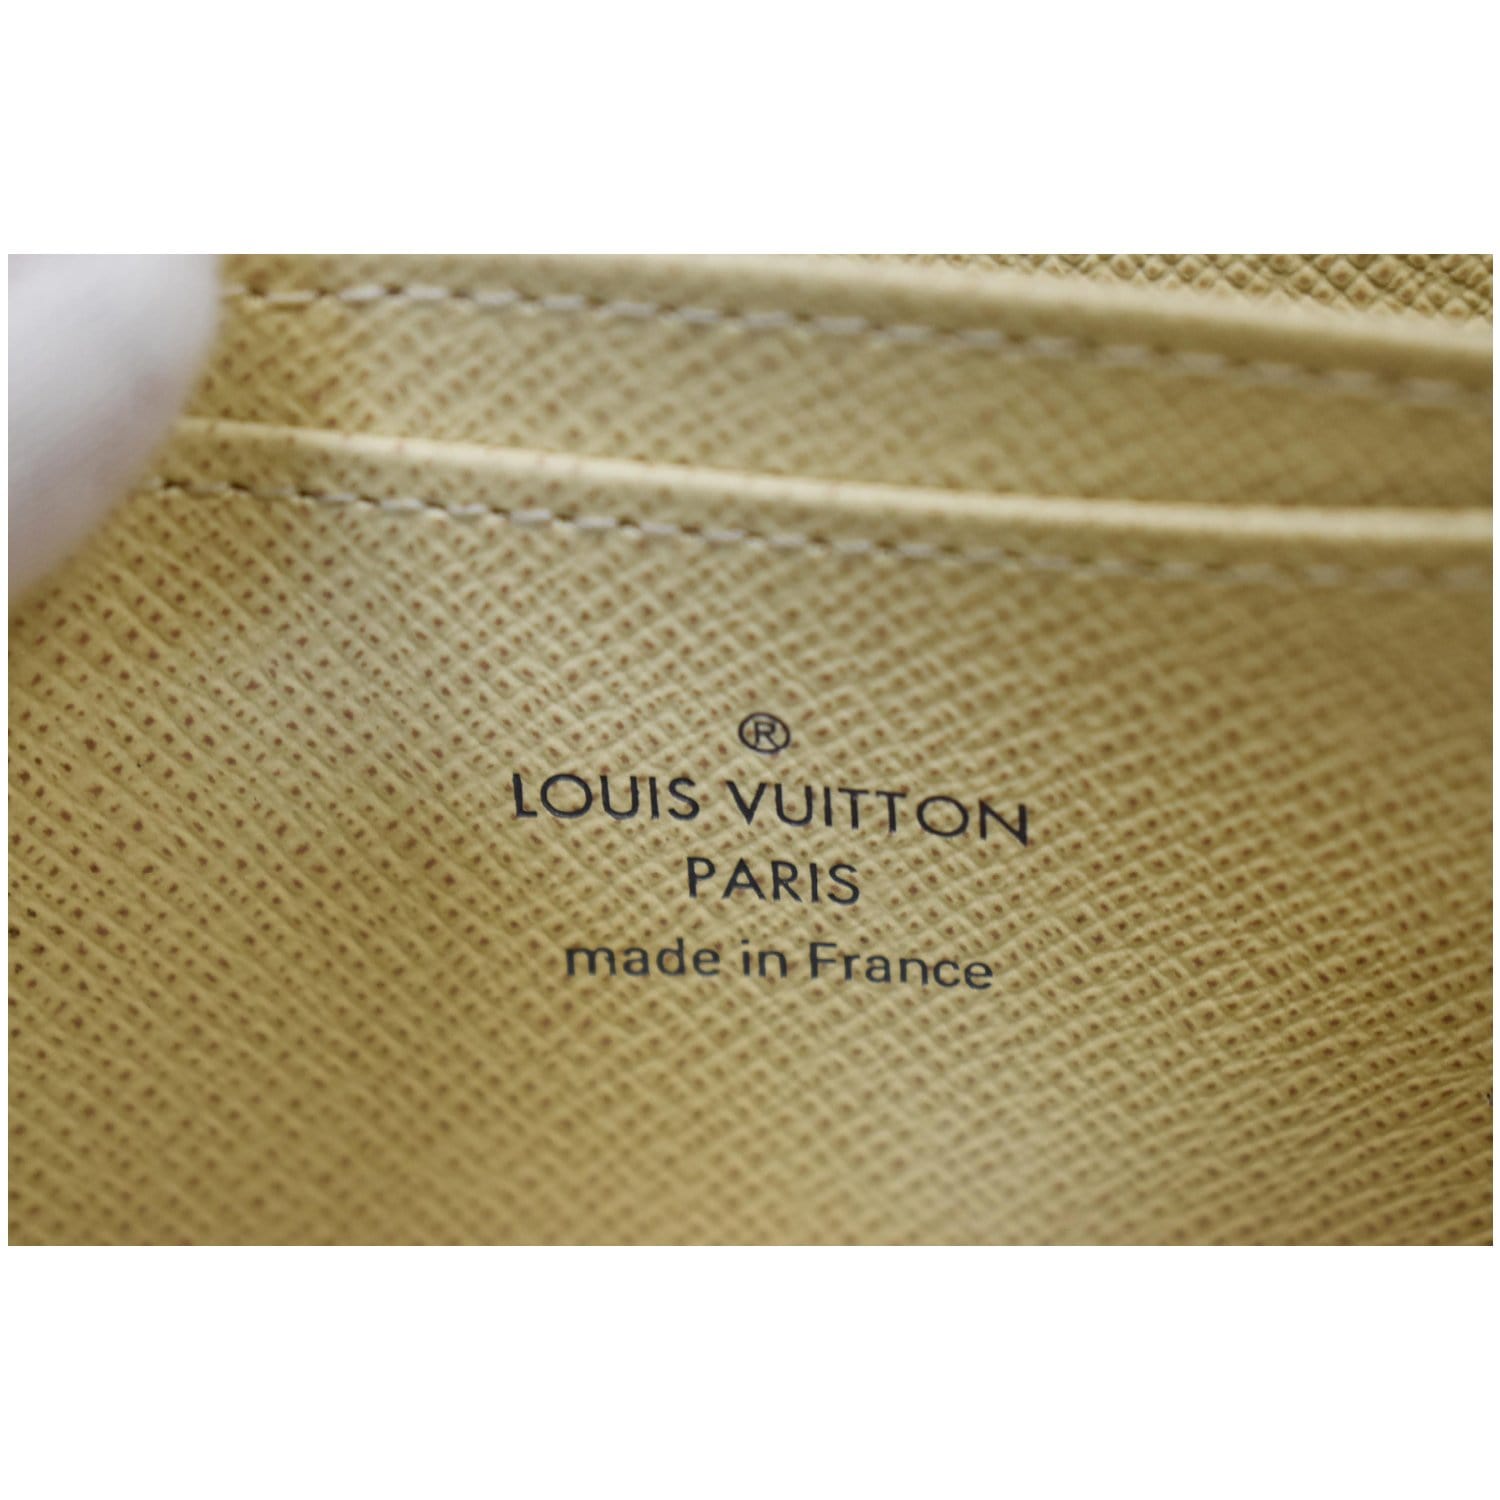 Buy Louis Vuitton Damier Azur LOUIS VUITTON Zippy Coin Purse Damier Azur  N60229 Coin Case White / 083565 [Used] from Japan - Buy authentic Plus  exclusive items from Japan